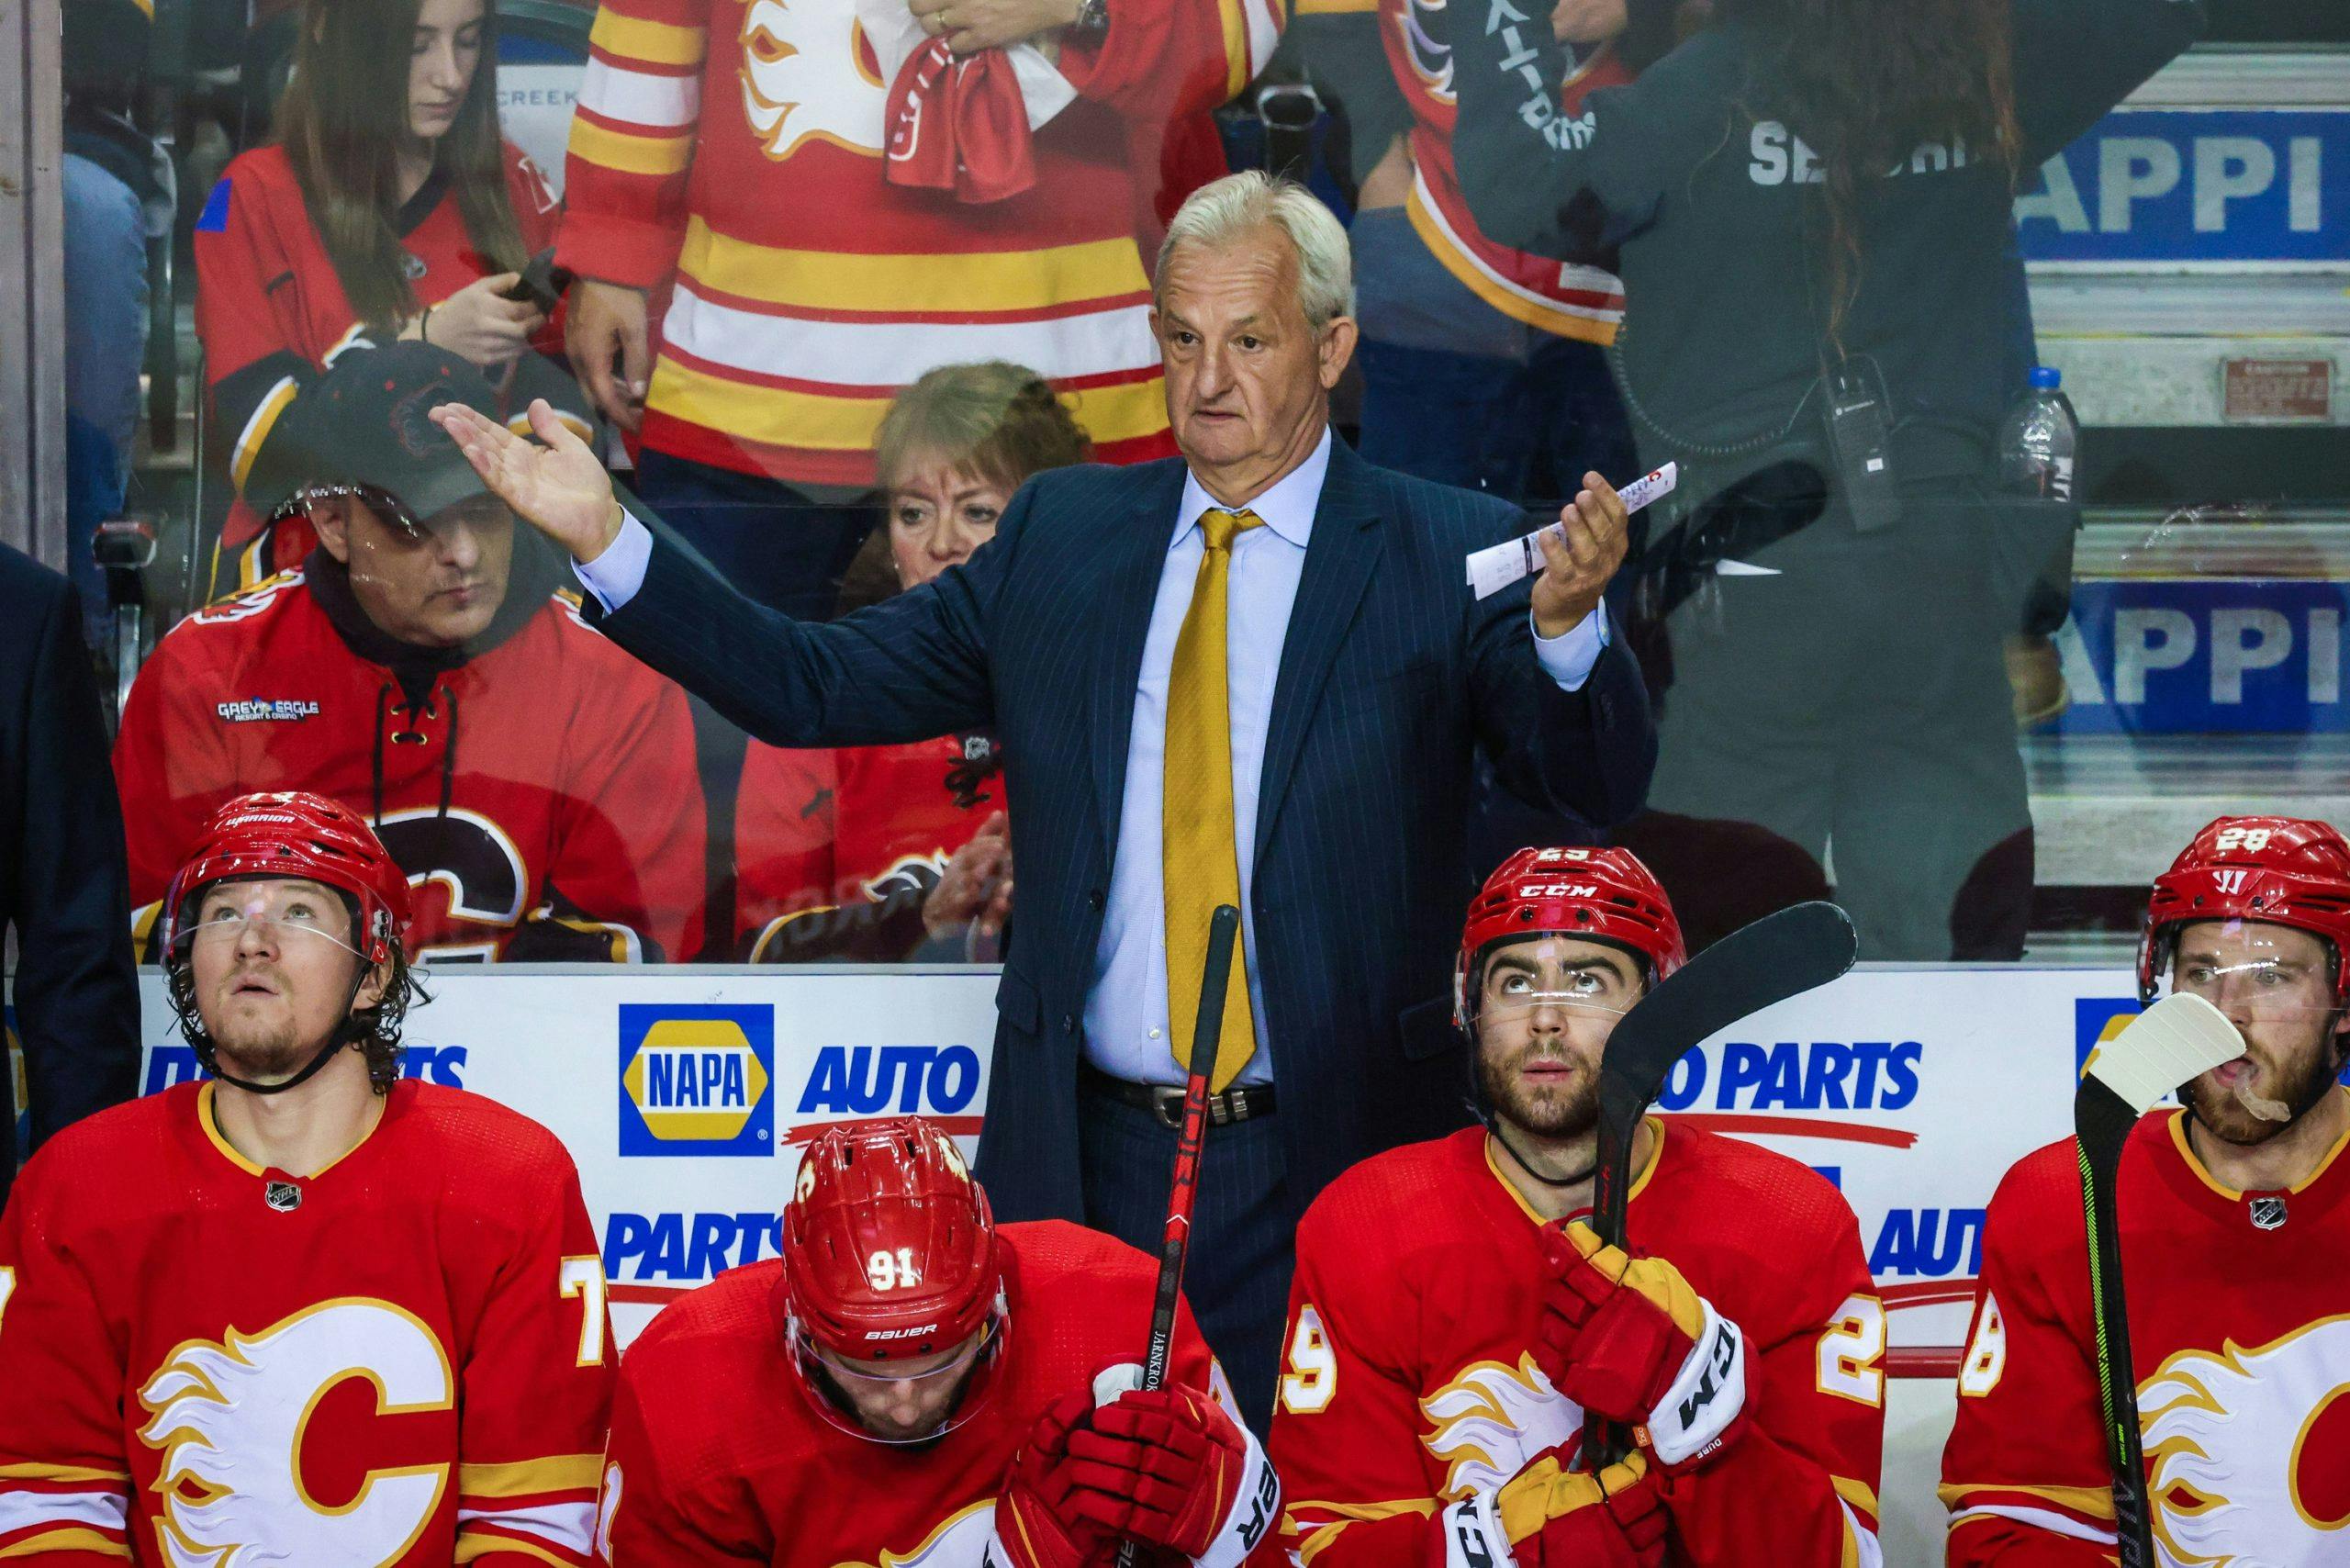 Calgary Flames: Ranking the top 5 coaches in Flames history